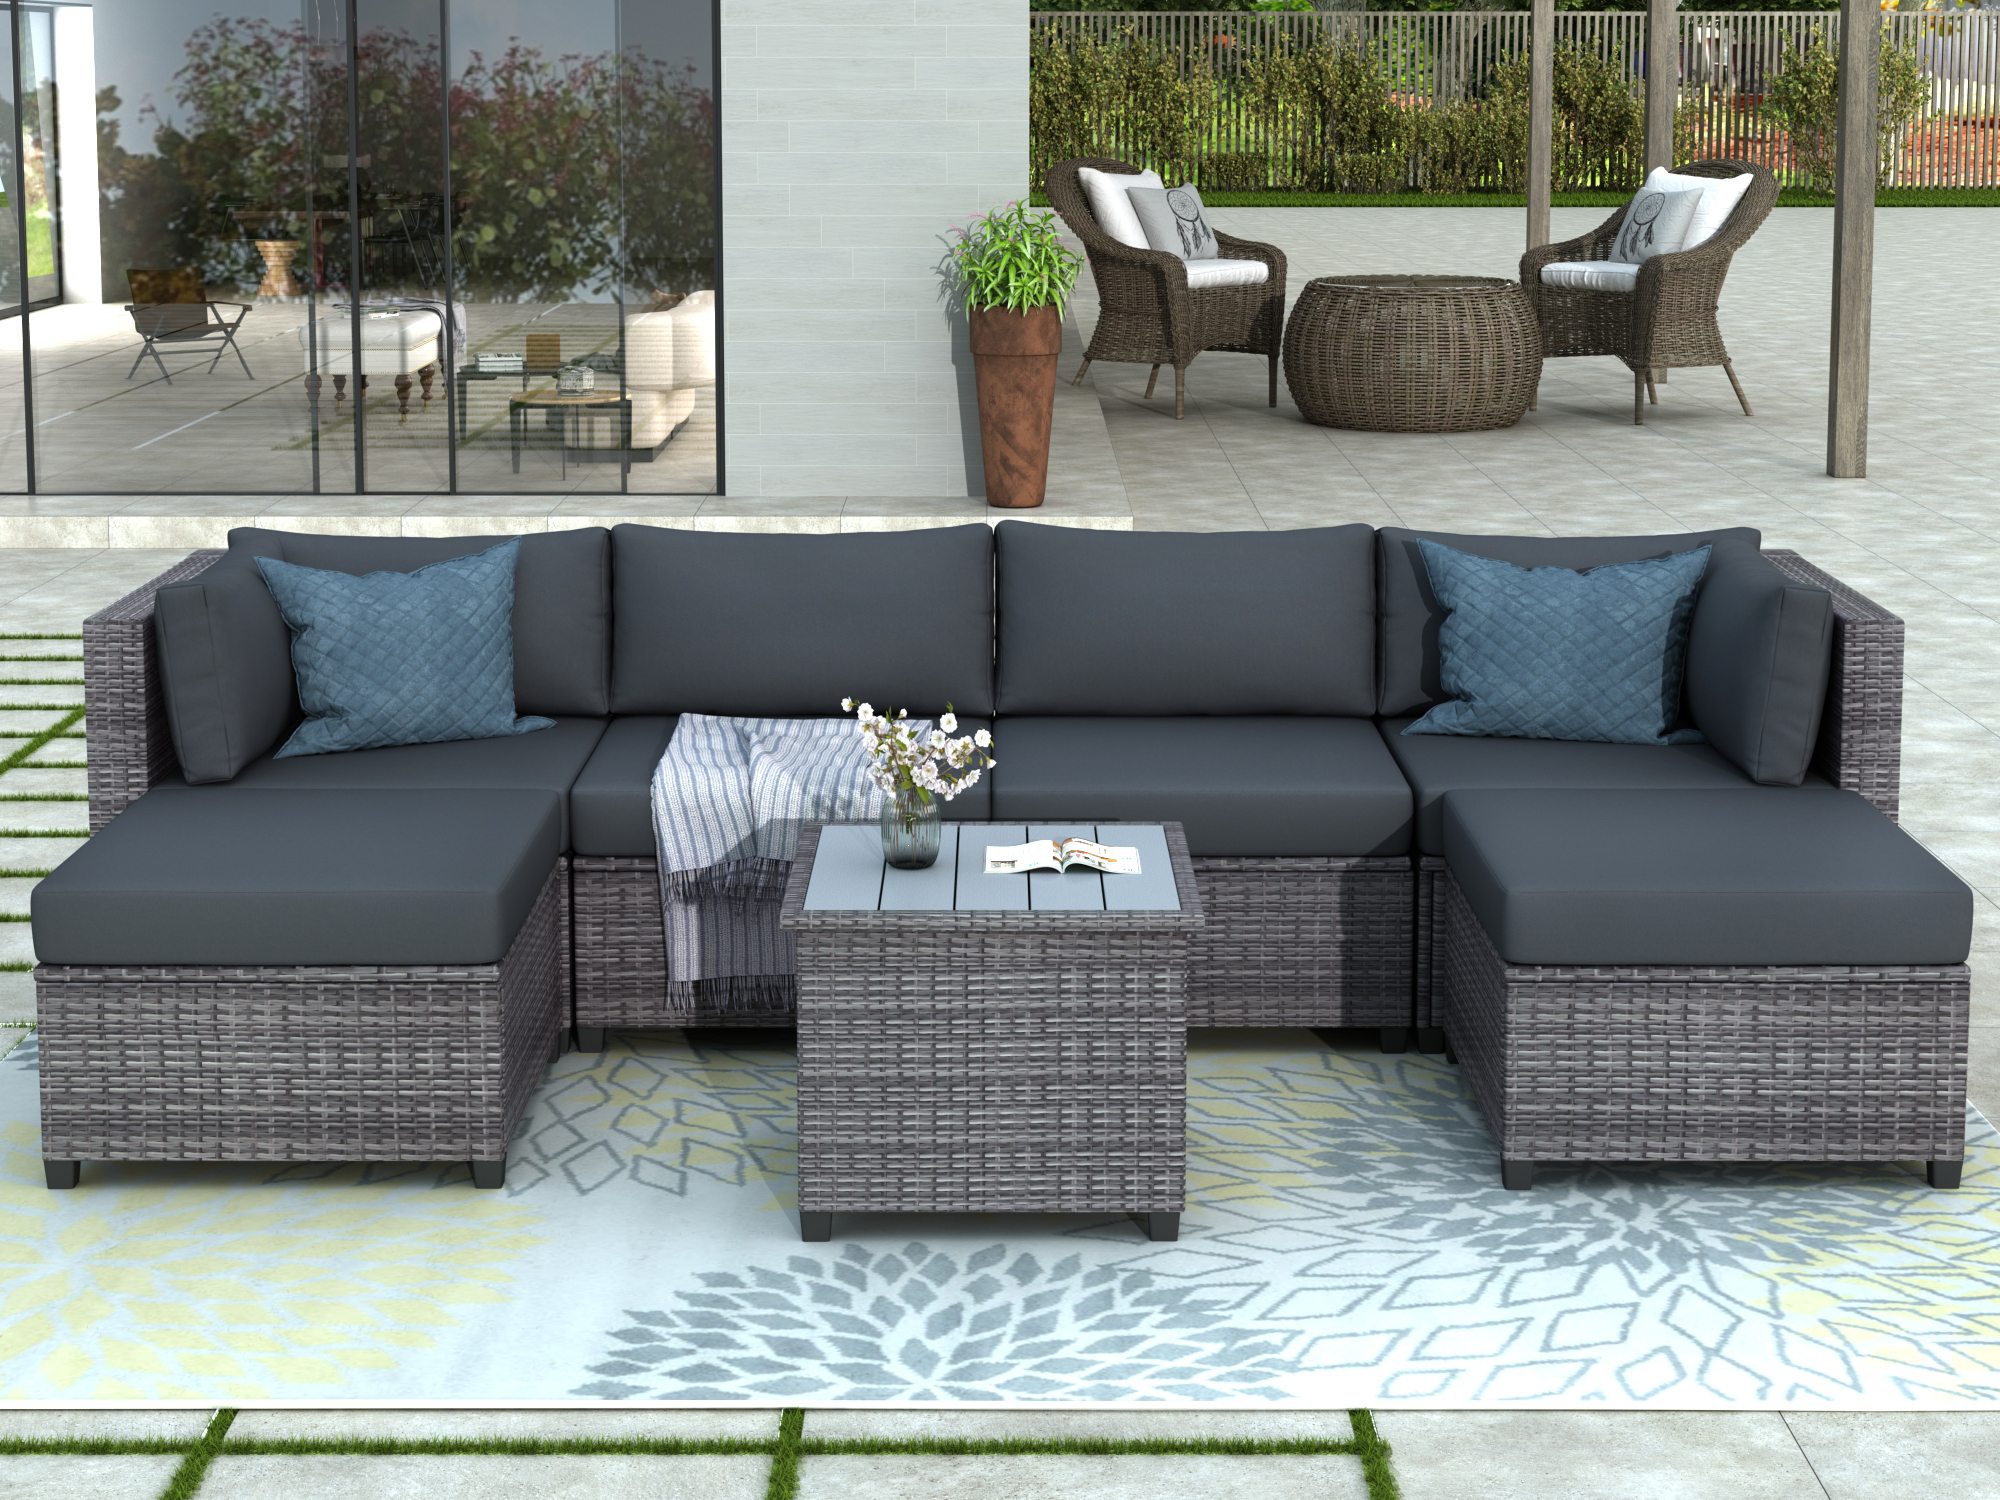 Outdoor Conversation Sets, 7 Piece Patio Furniture Sets with 4 PE Wicker Sofas, 2 Ottoman, Coffee Table, All-Weather Patio Sectional Sofa Set with Gray Cushions for Backyard Porch Garden Pool, LLL33 - image 2 of 8